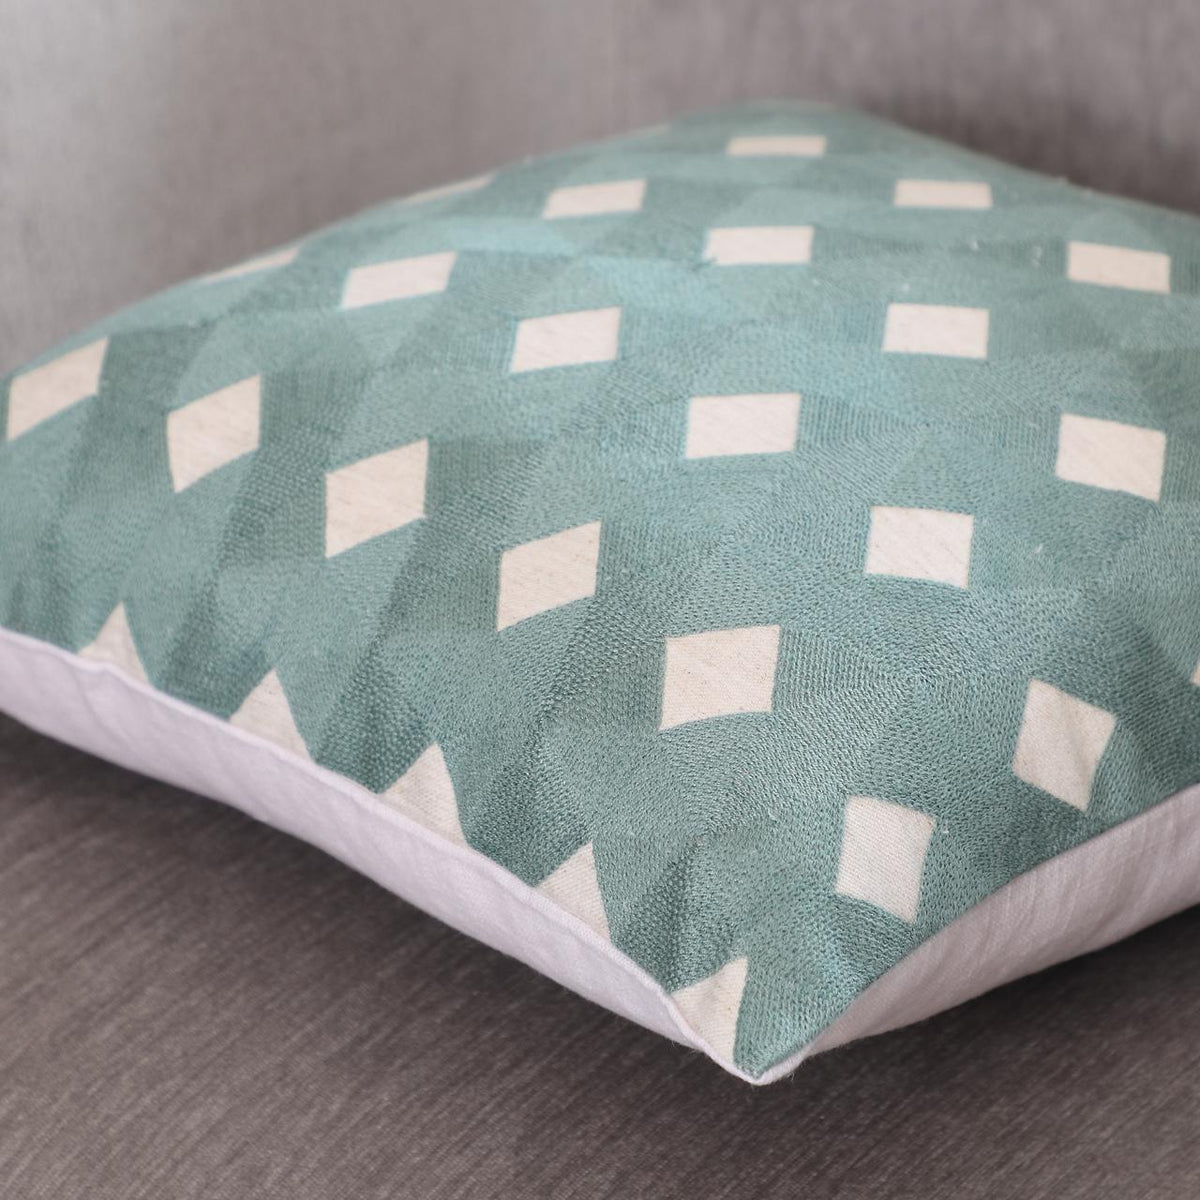 Teal Embroidered Cushion Cover